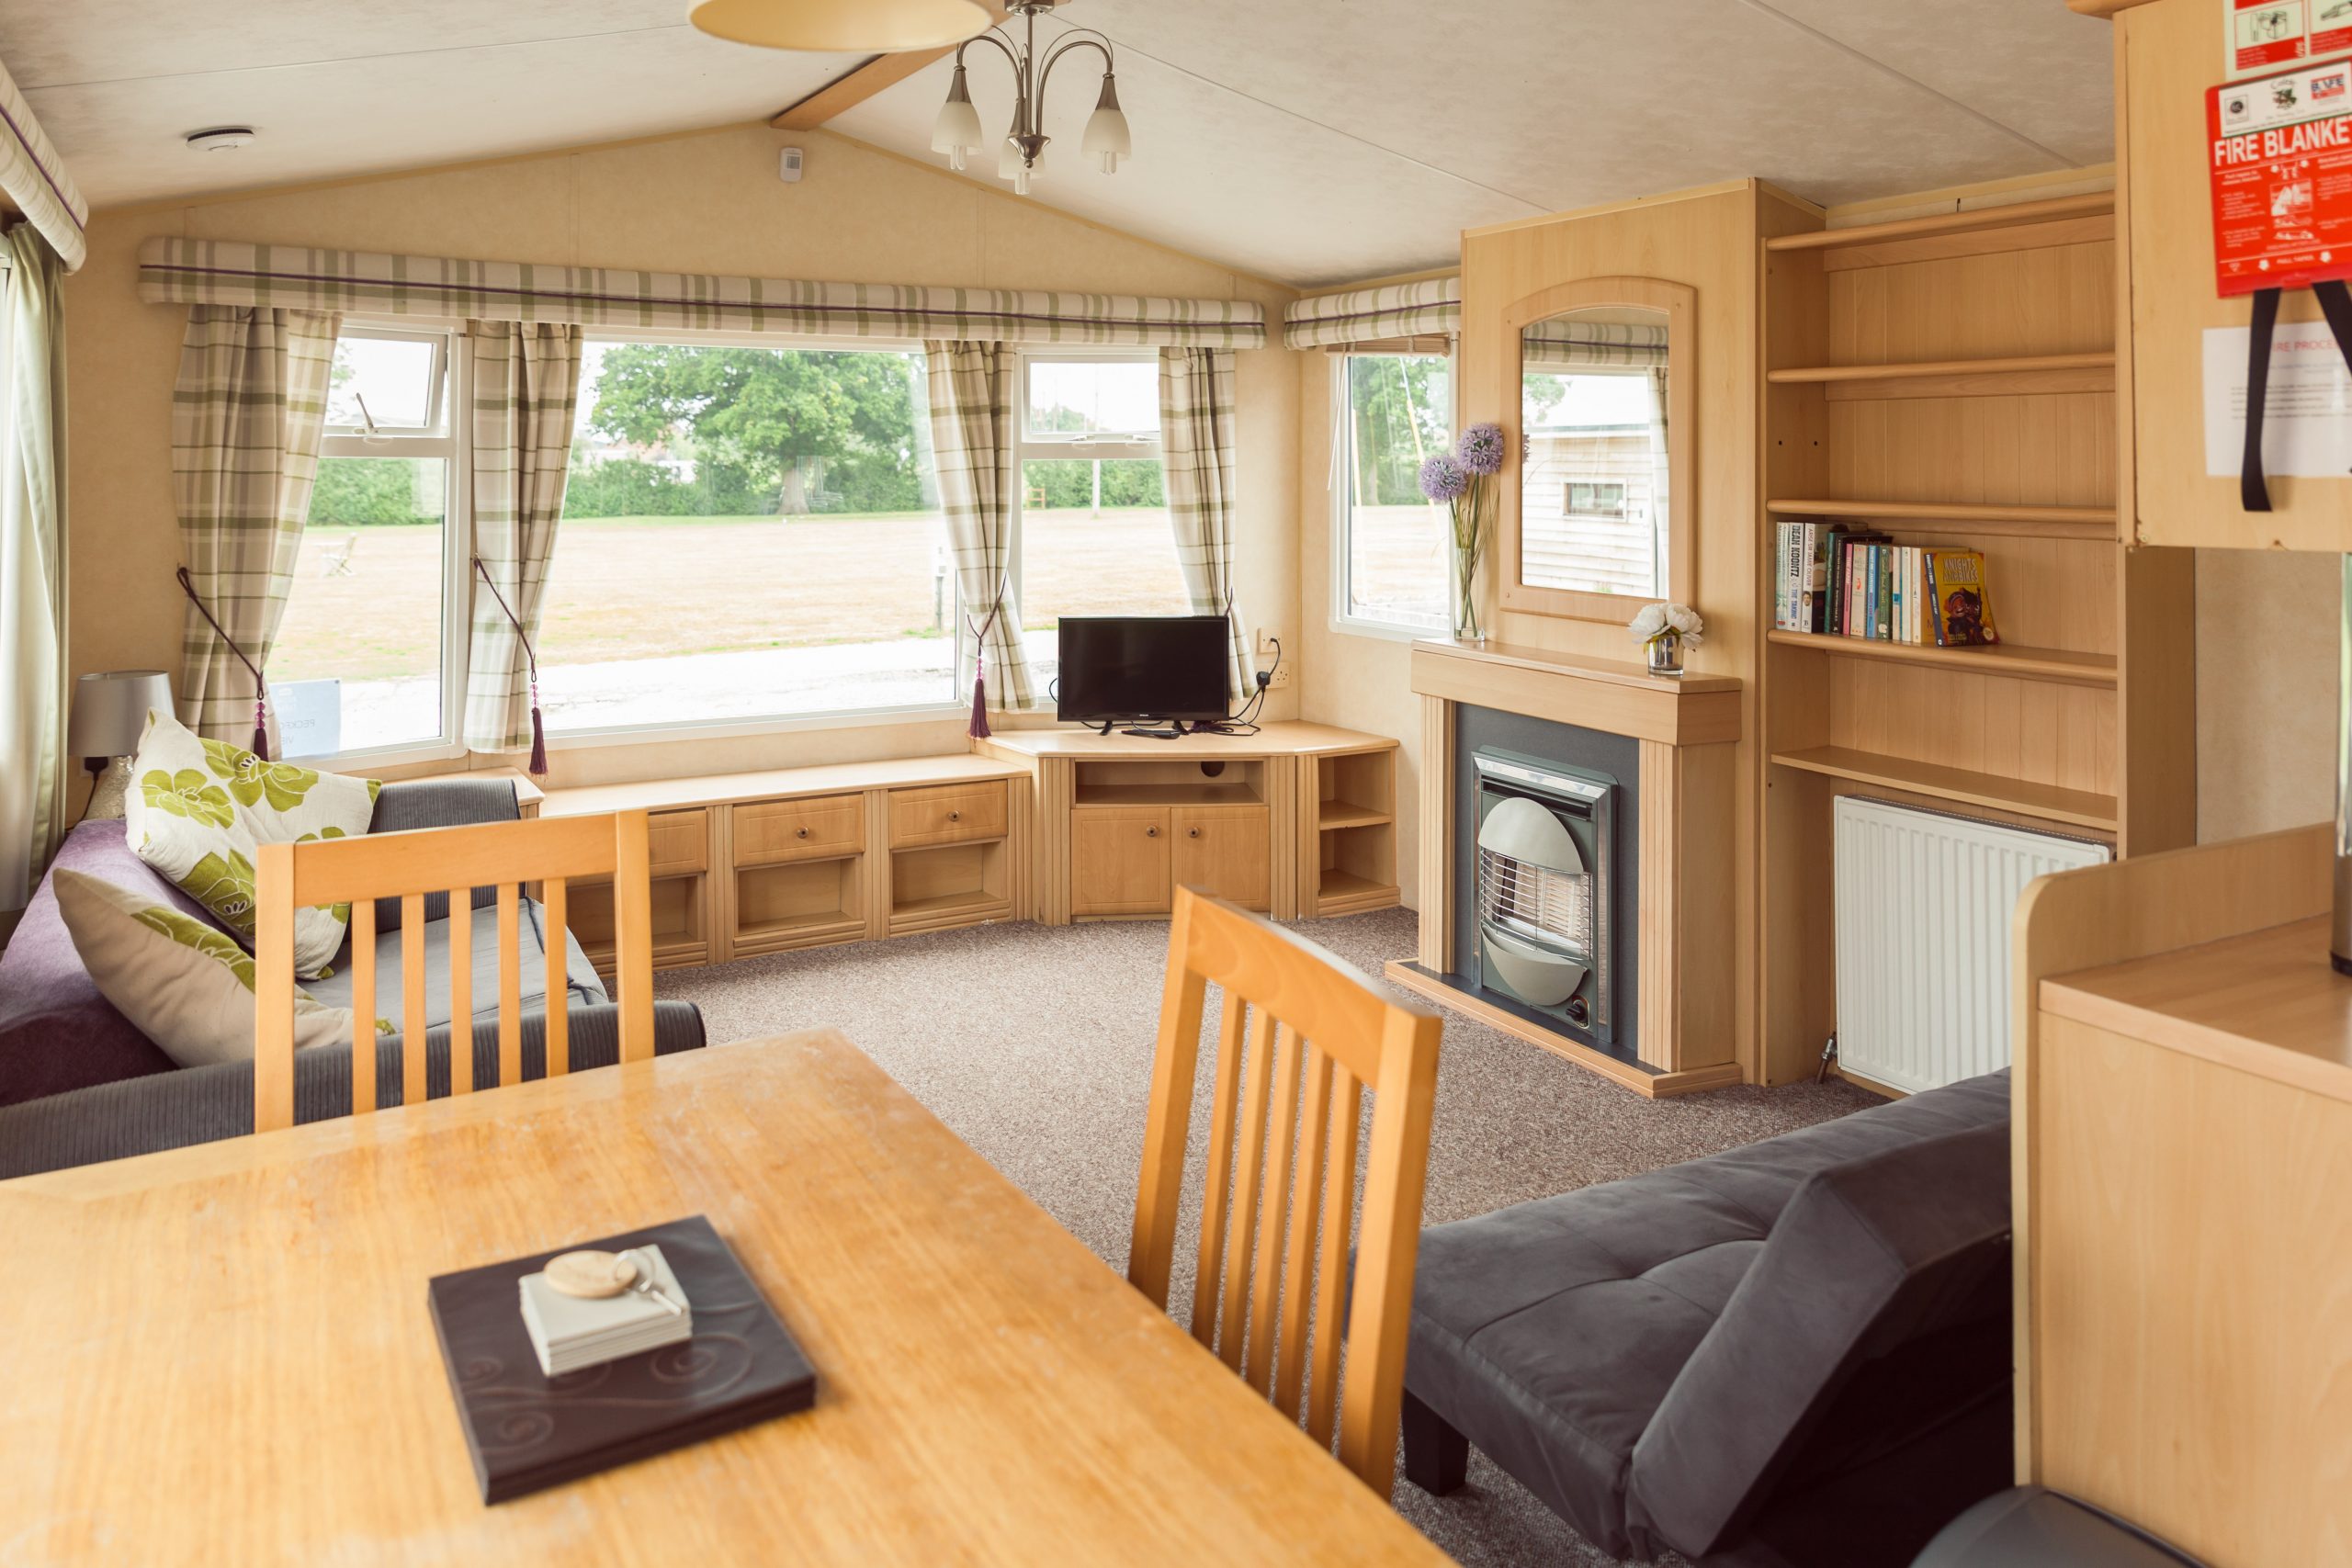 Pitch and Canvas | Glamping and Camping in Cheshire | Static caravan interior